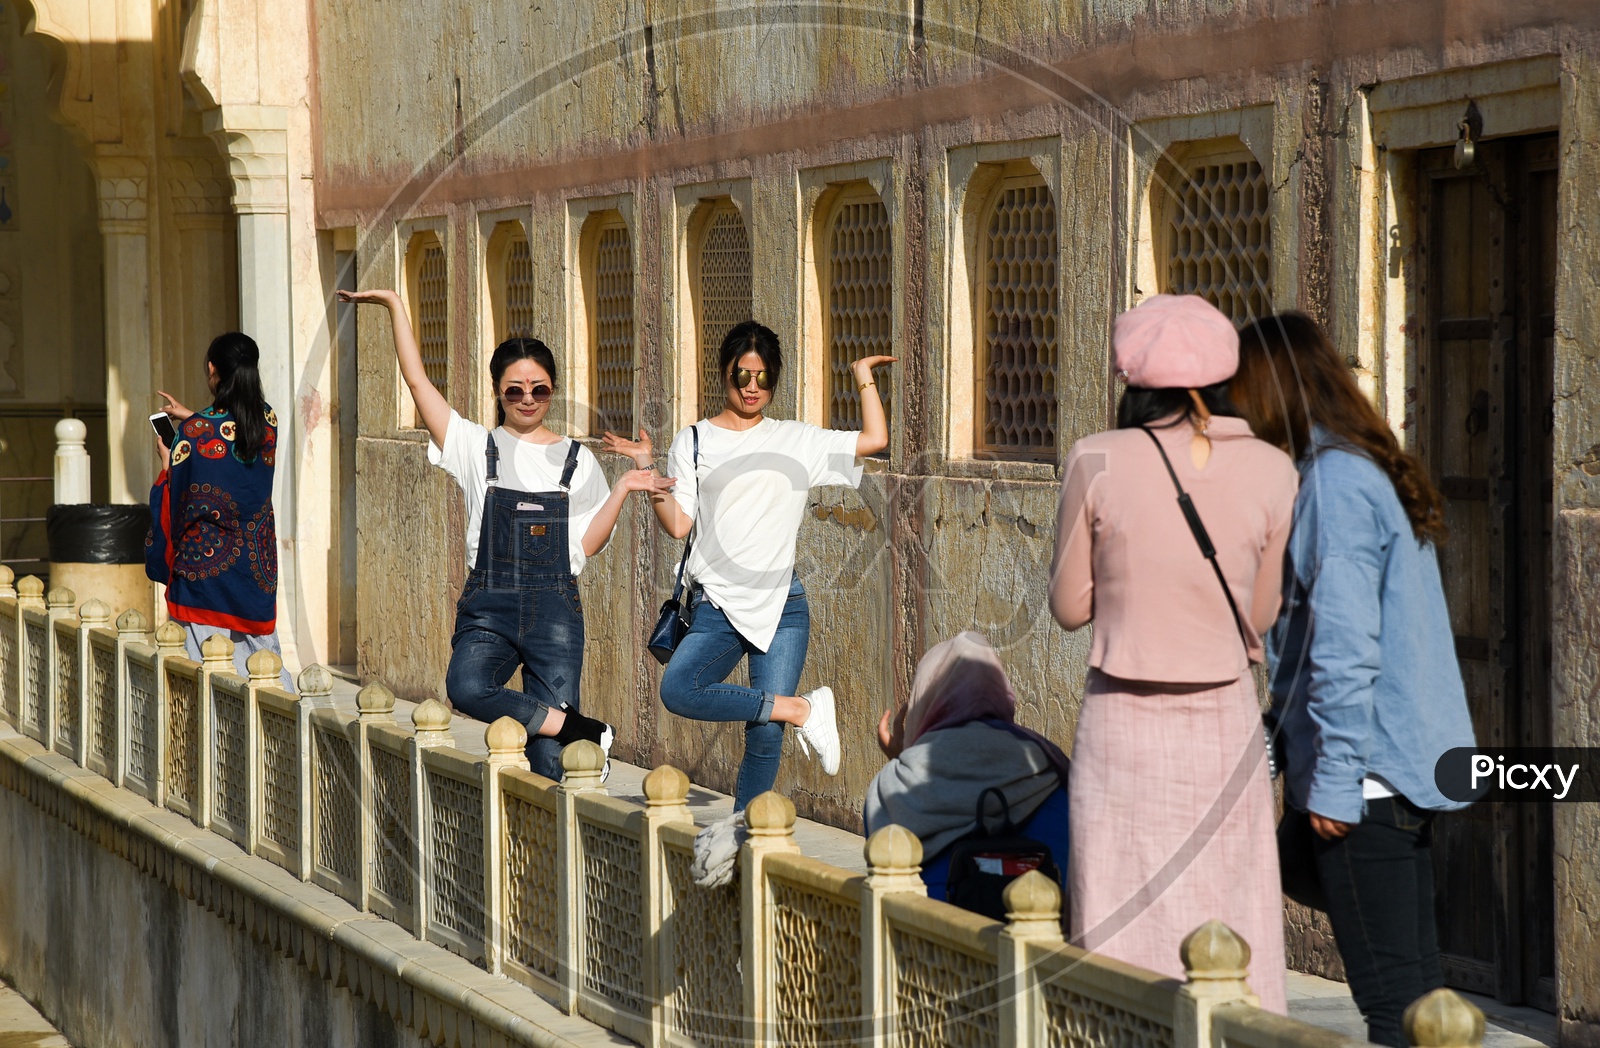 Japanese tourists trying some fun poses.